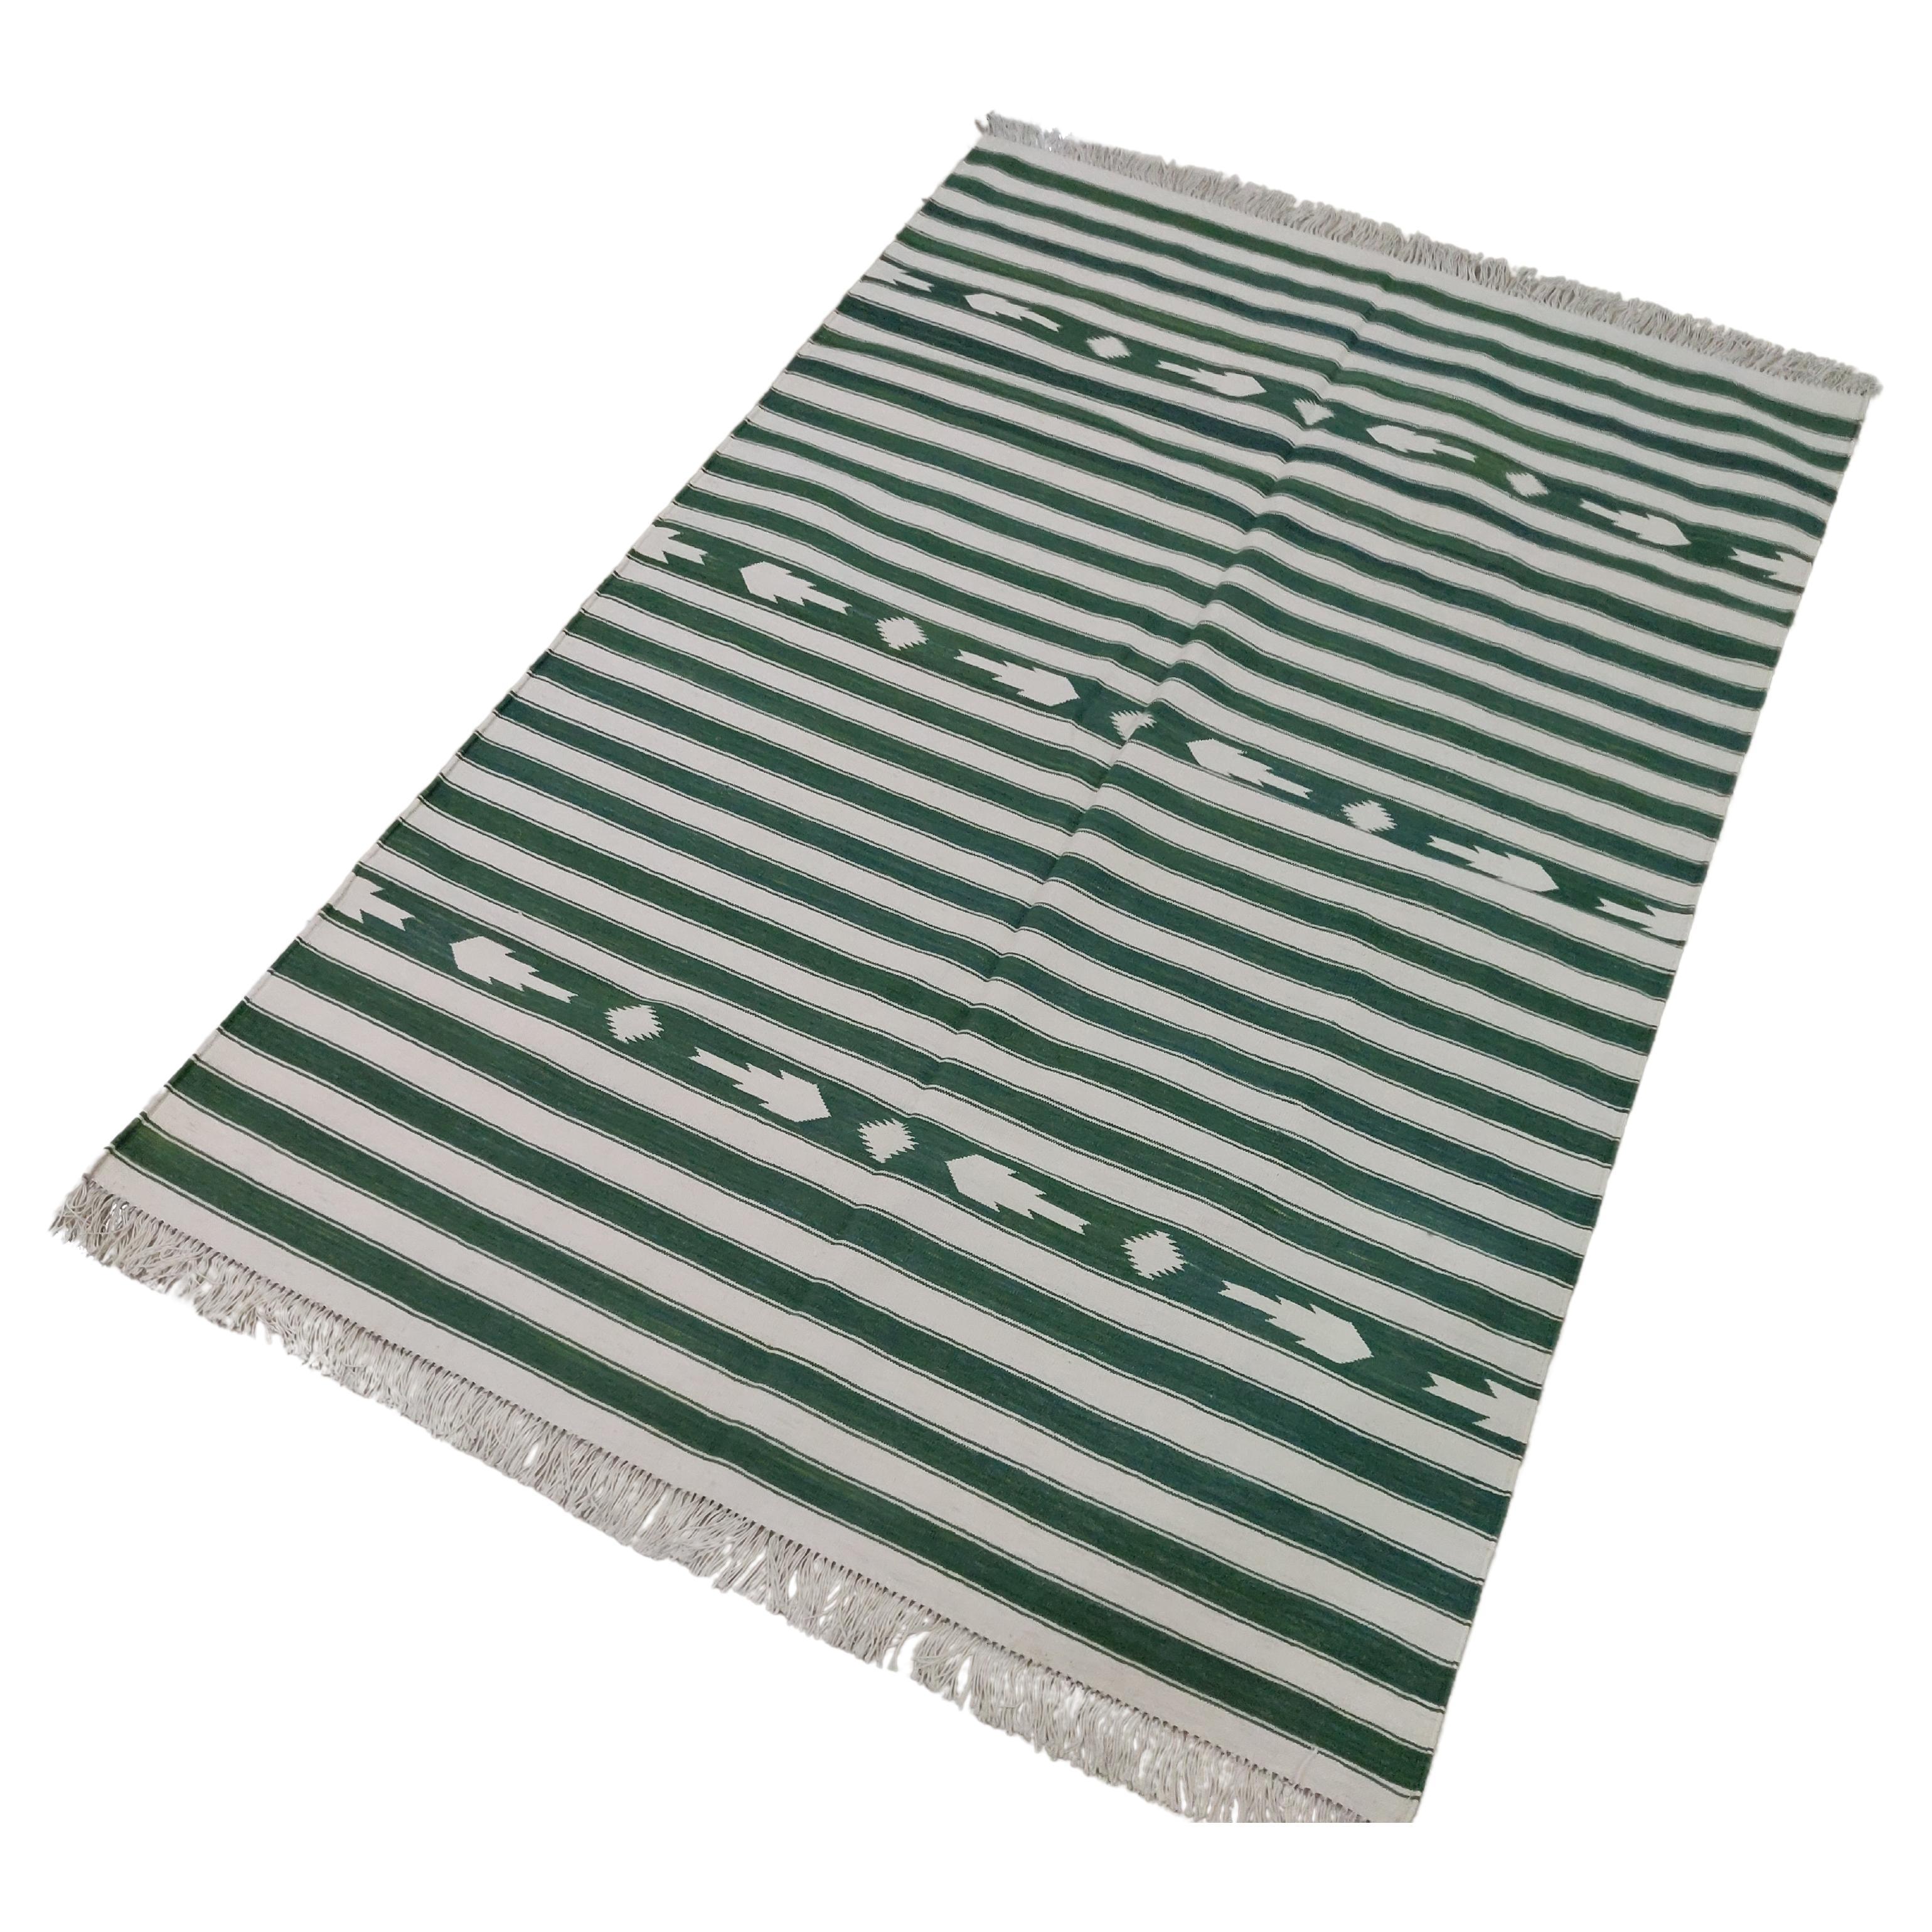 Handmade Cotton Area Flat Weave Rug, 3x5 Green And White Striped Indian Dhurrie For Sale